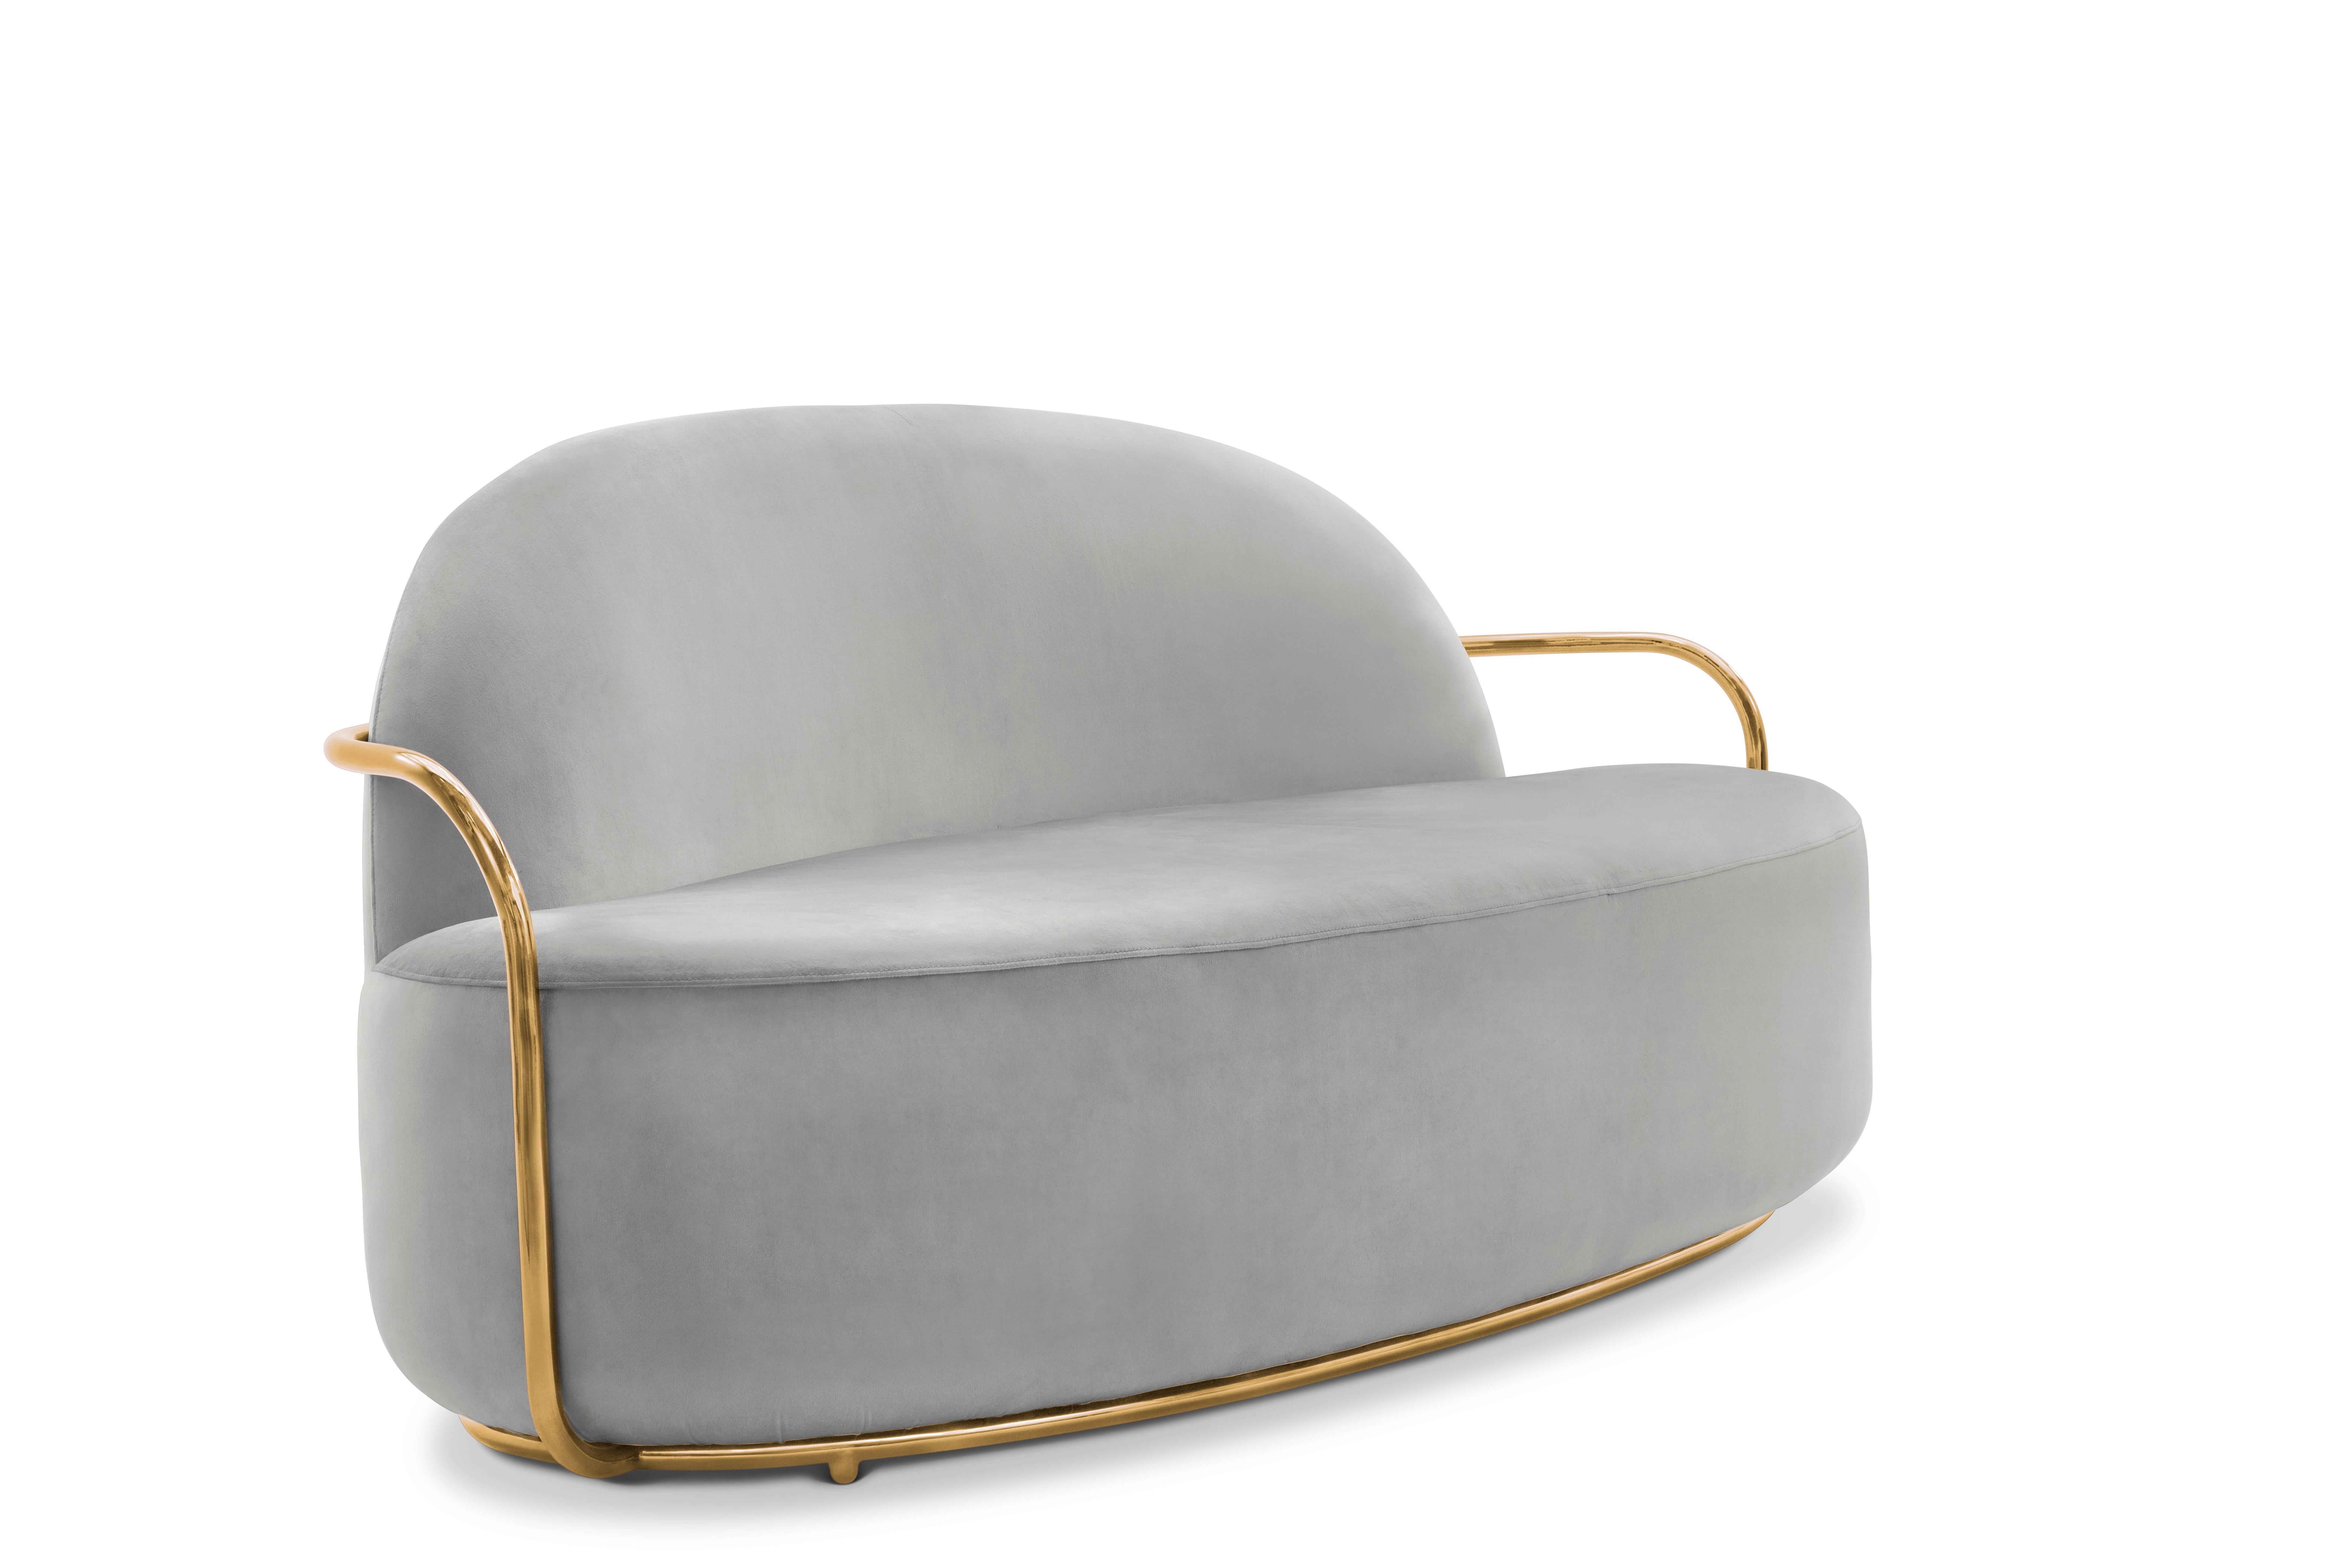 Orion sofa grey by Nika Zupanc for Scarlet Splendour.

The 88 constellations of the universe mysterious and magical, holding a promise to guide our destinies. Little wonder that they are the muse for the 88 Secrets, Nika Zupanc’s debut collection